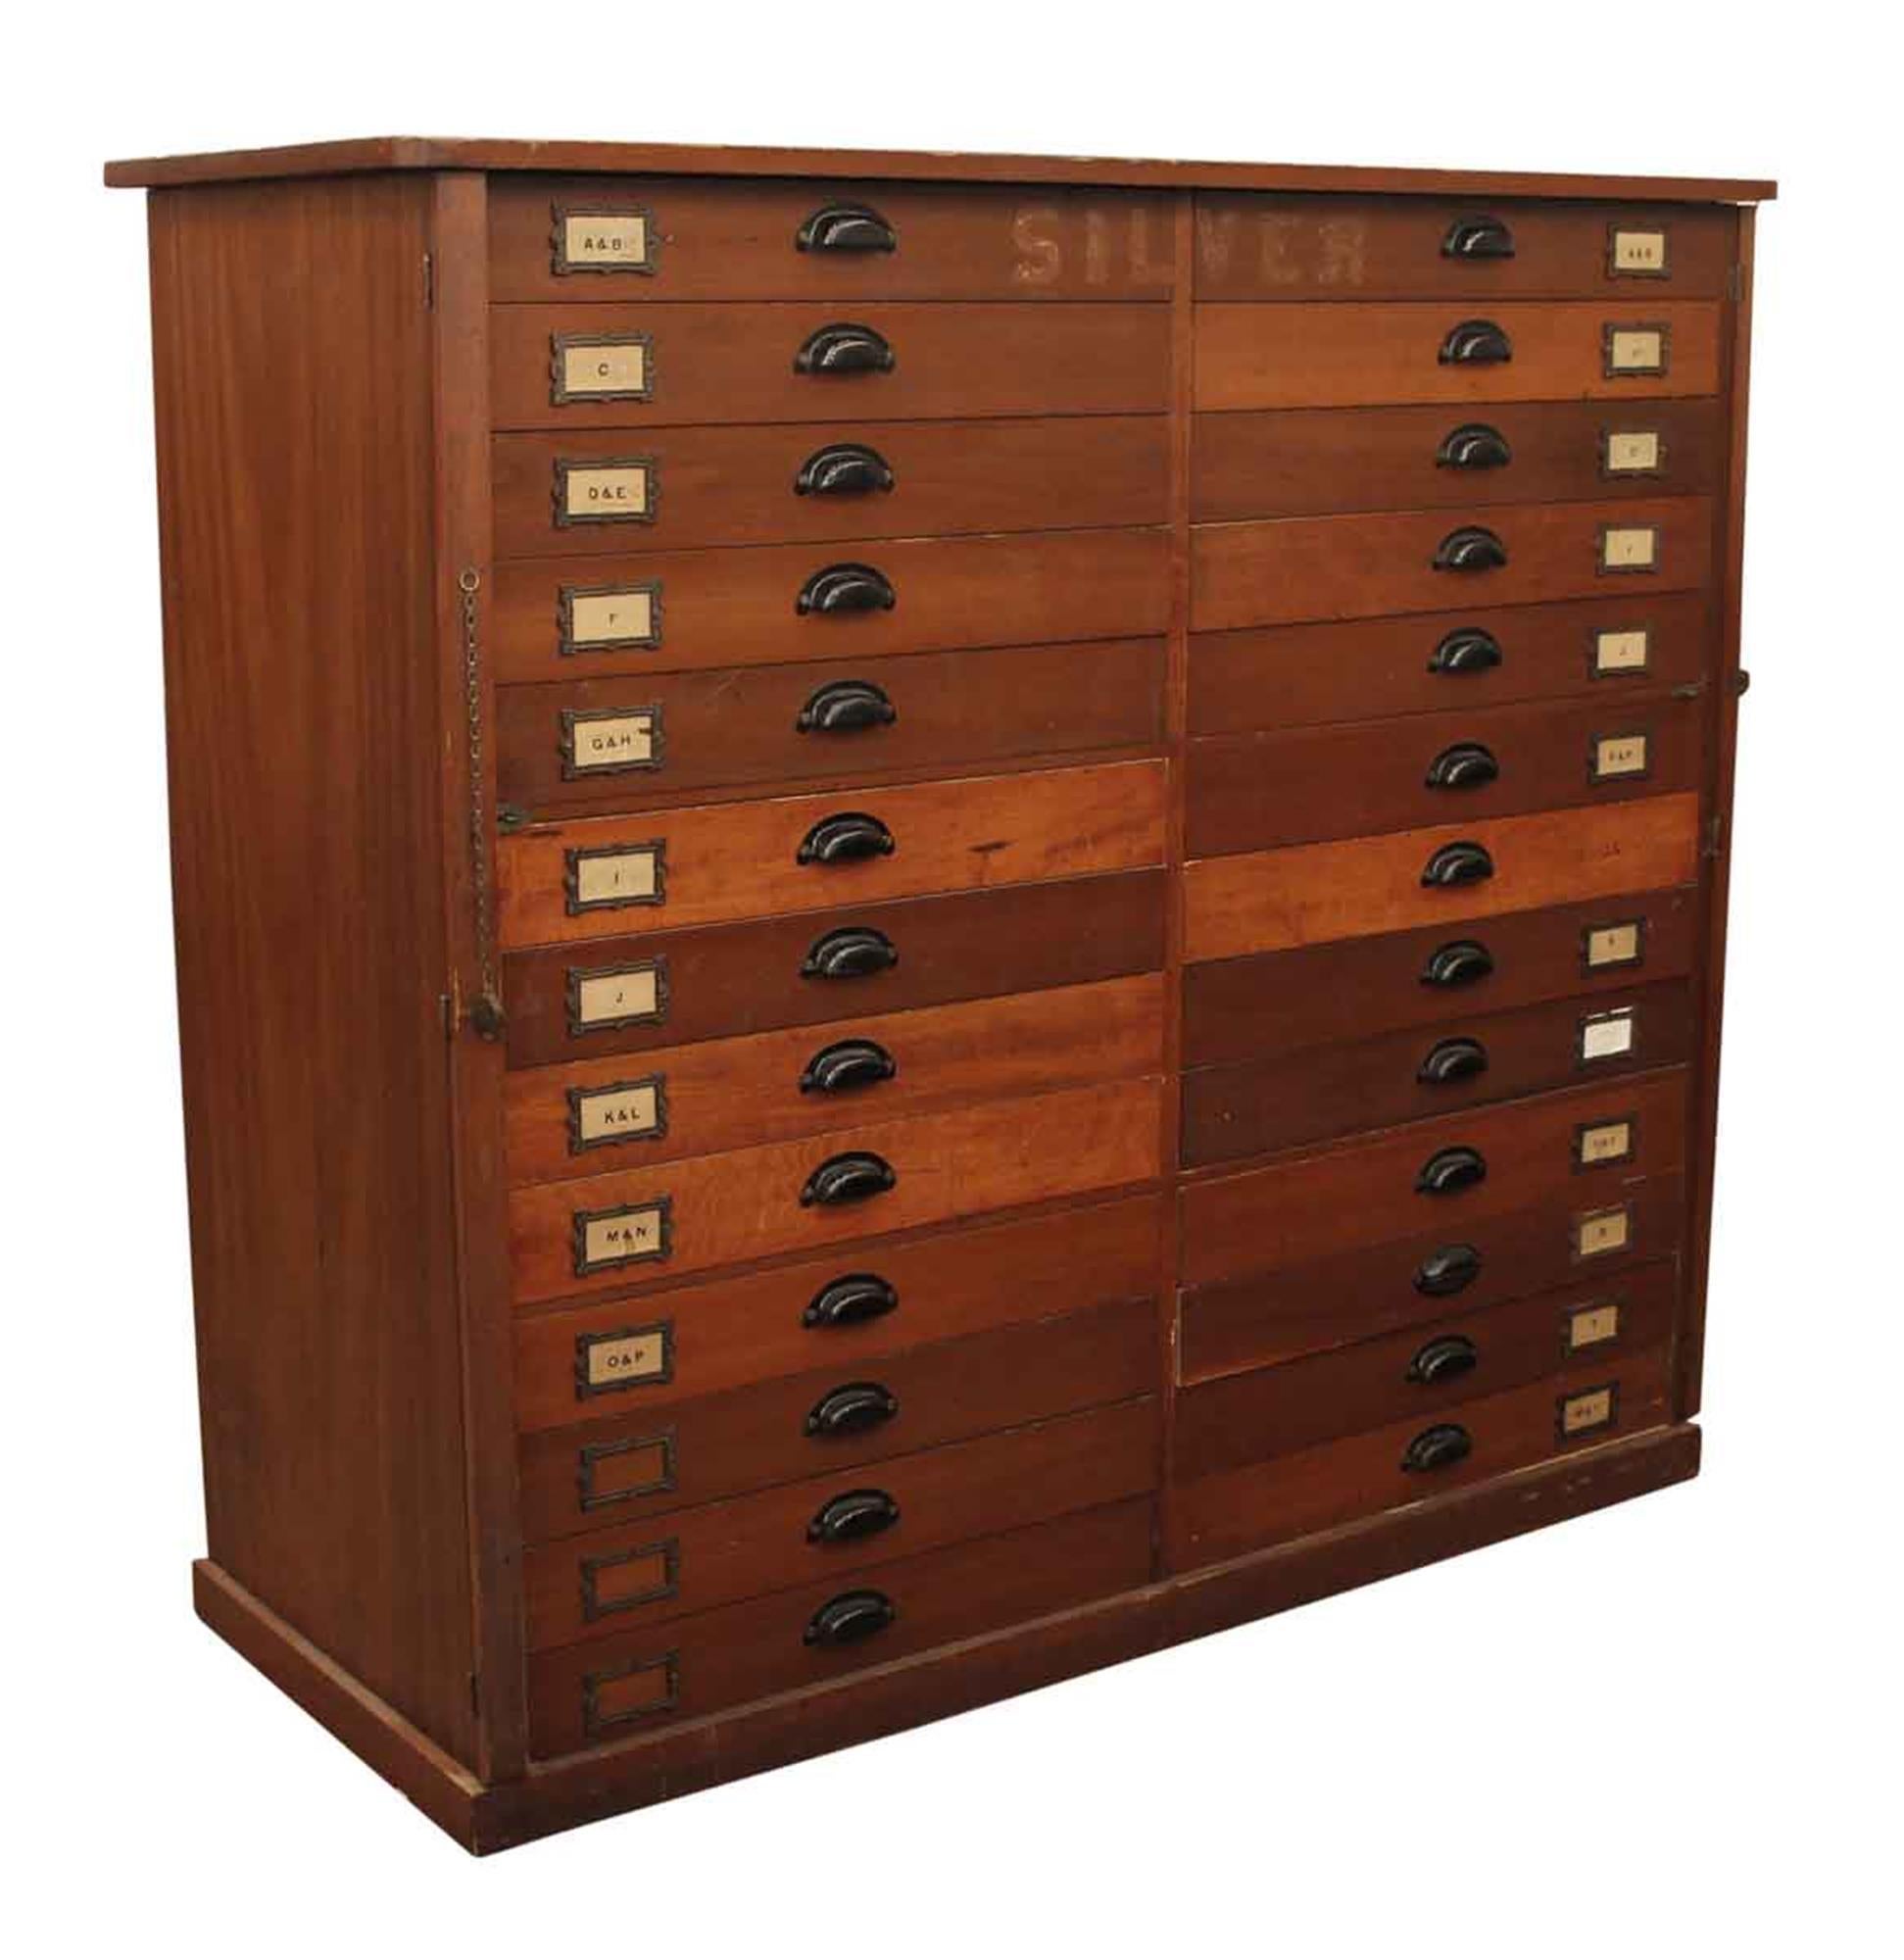 1920s large 26-drawer wooden flatware cabinet from an early 20th century New England company that made flatware. It originally locked from either side by a wood bar over the edge of drawers. The original locks are still attached, but there is no